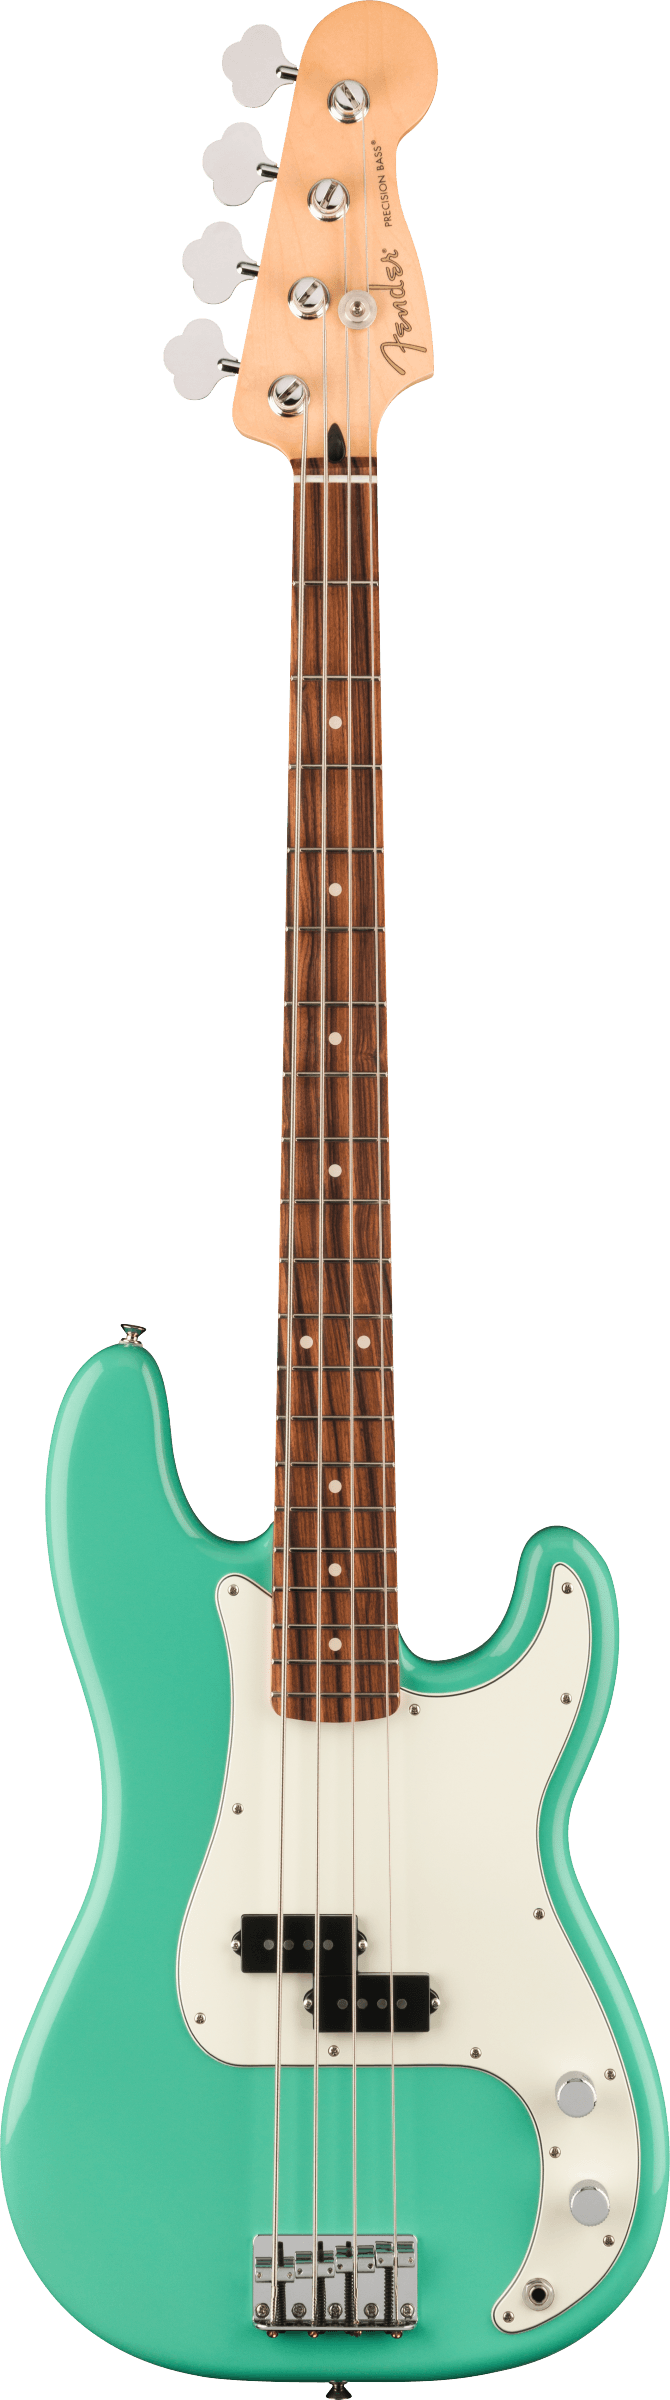 Fender Player Precision Bass in Seafoam Green - Andertons Music Co.